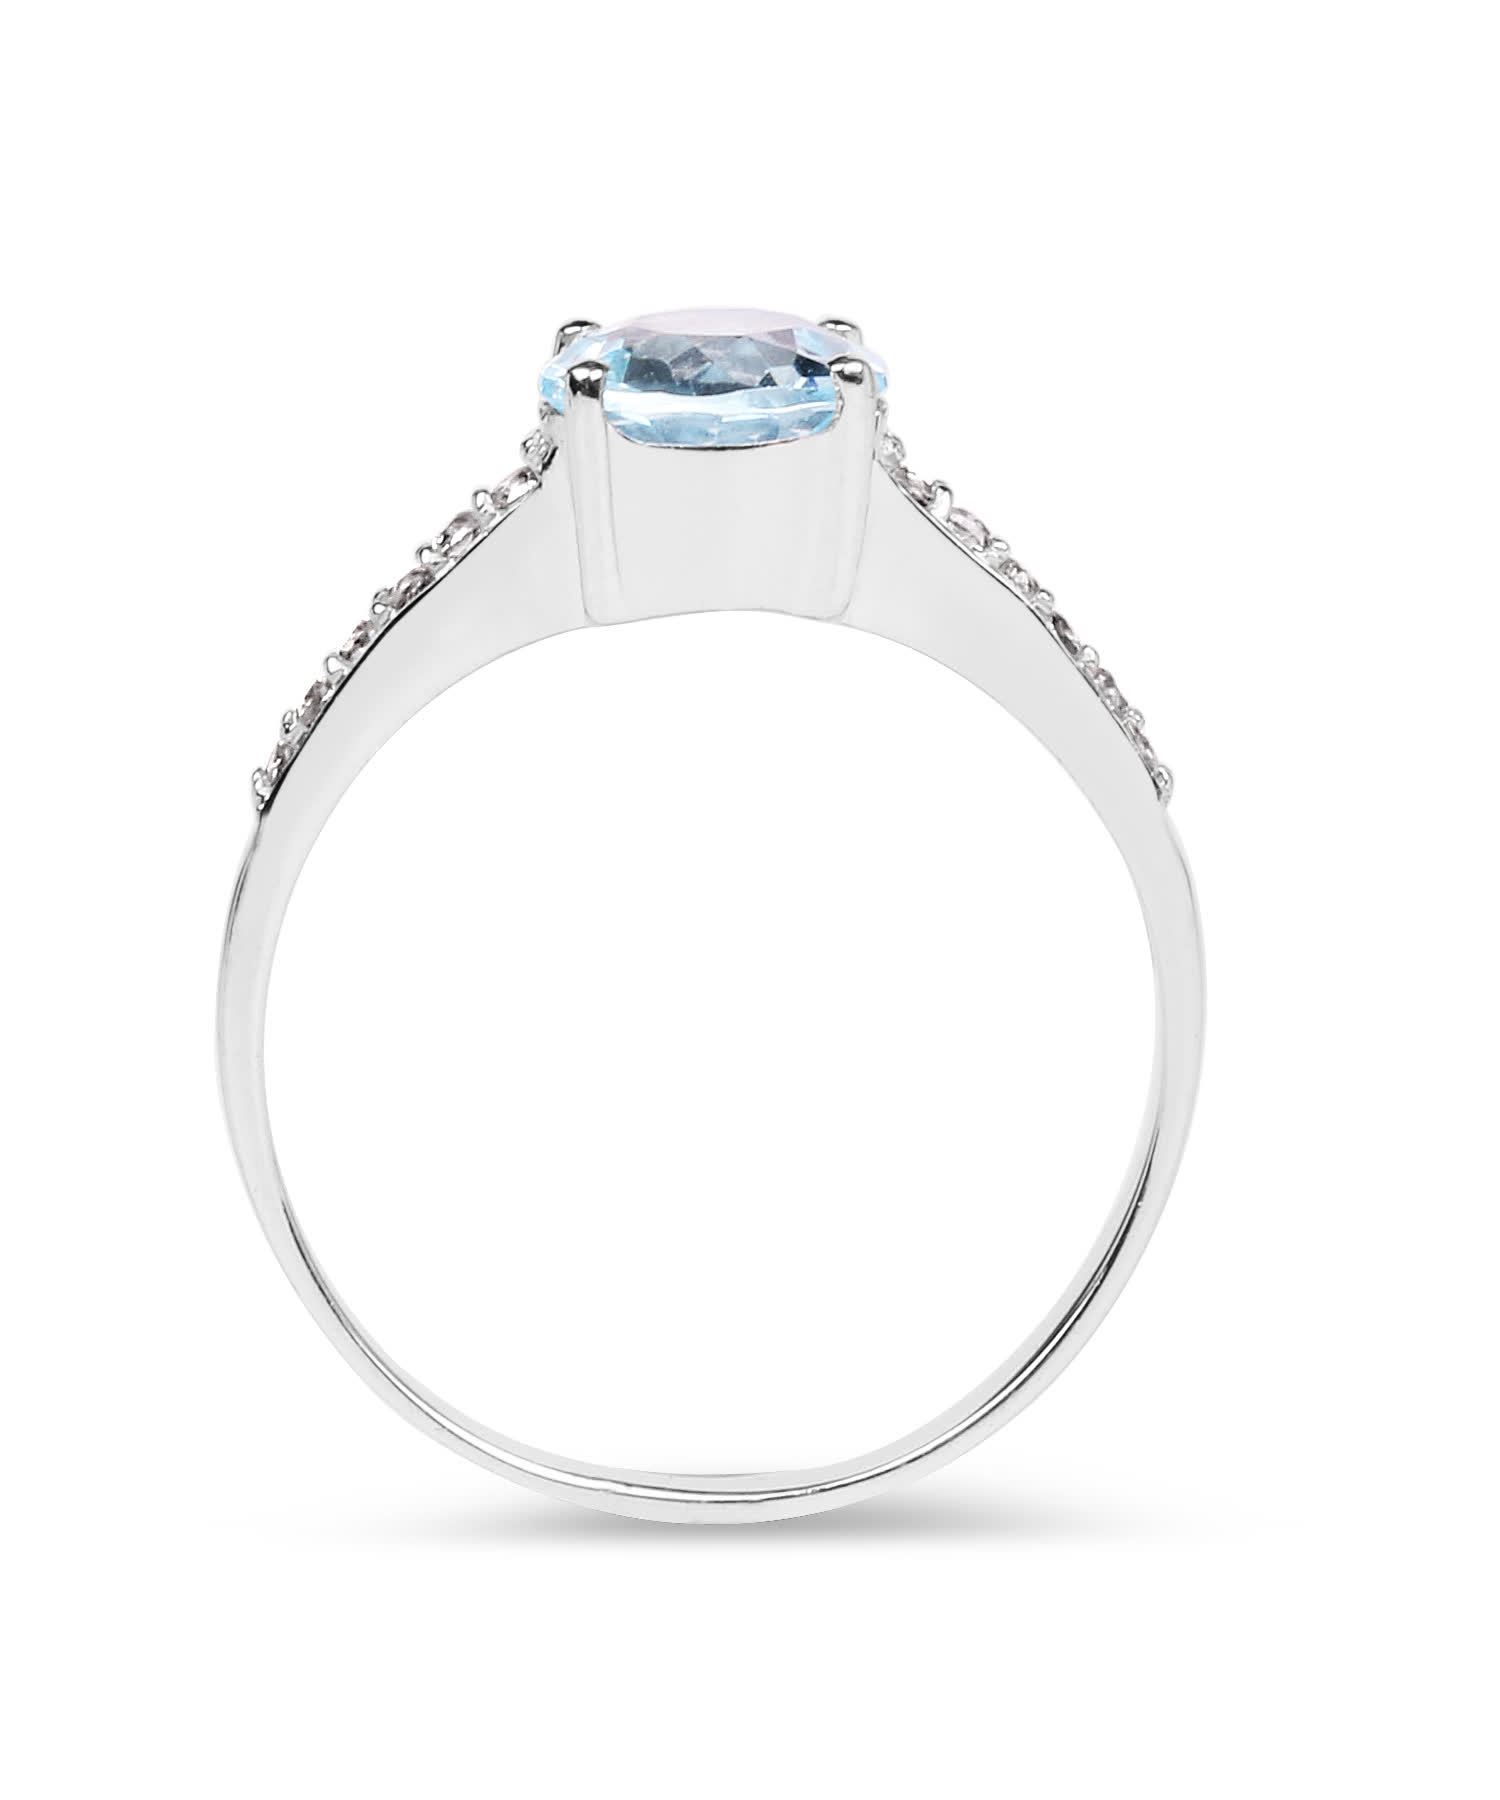 1.66ctw Natural Sky Blue Topaz Rhodium Plated 925 Sterling Silver Solitare Ring View 2